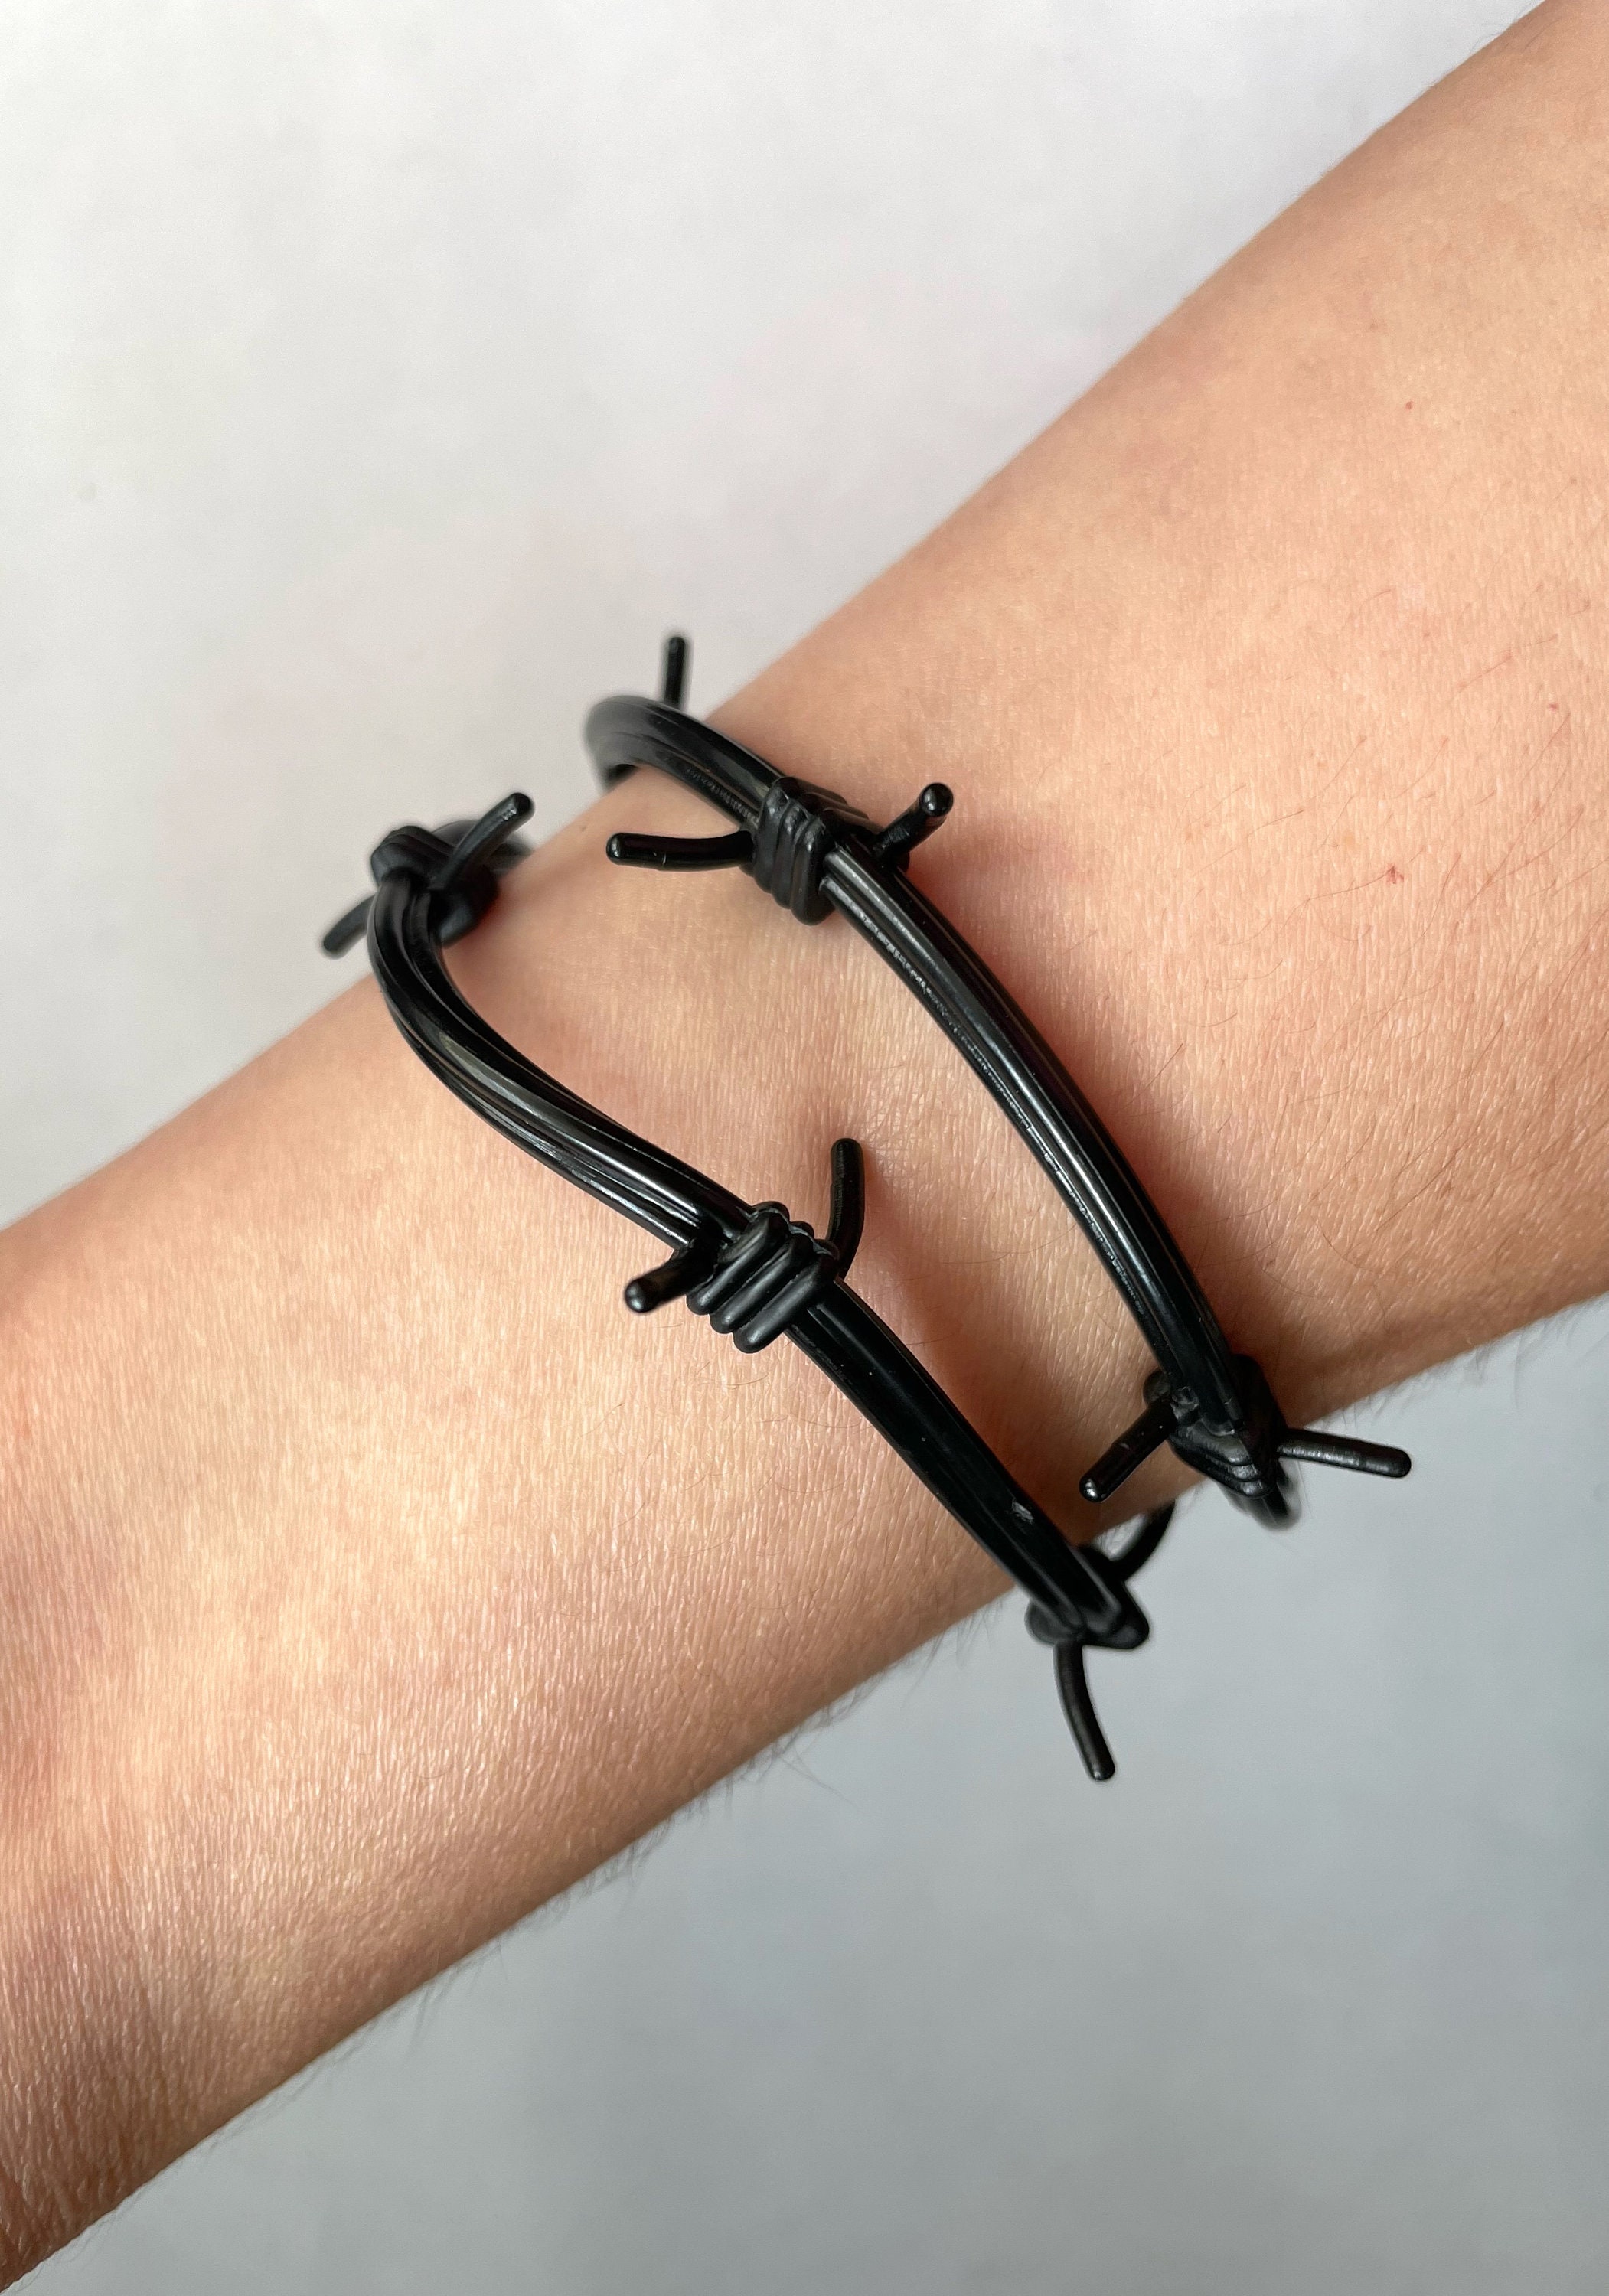 Black Barb Wire Bracelets for Kids (Small Size) Plastic. (12 Pack)